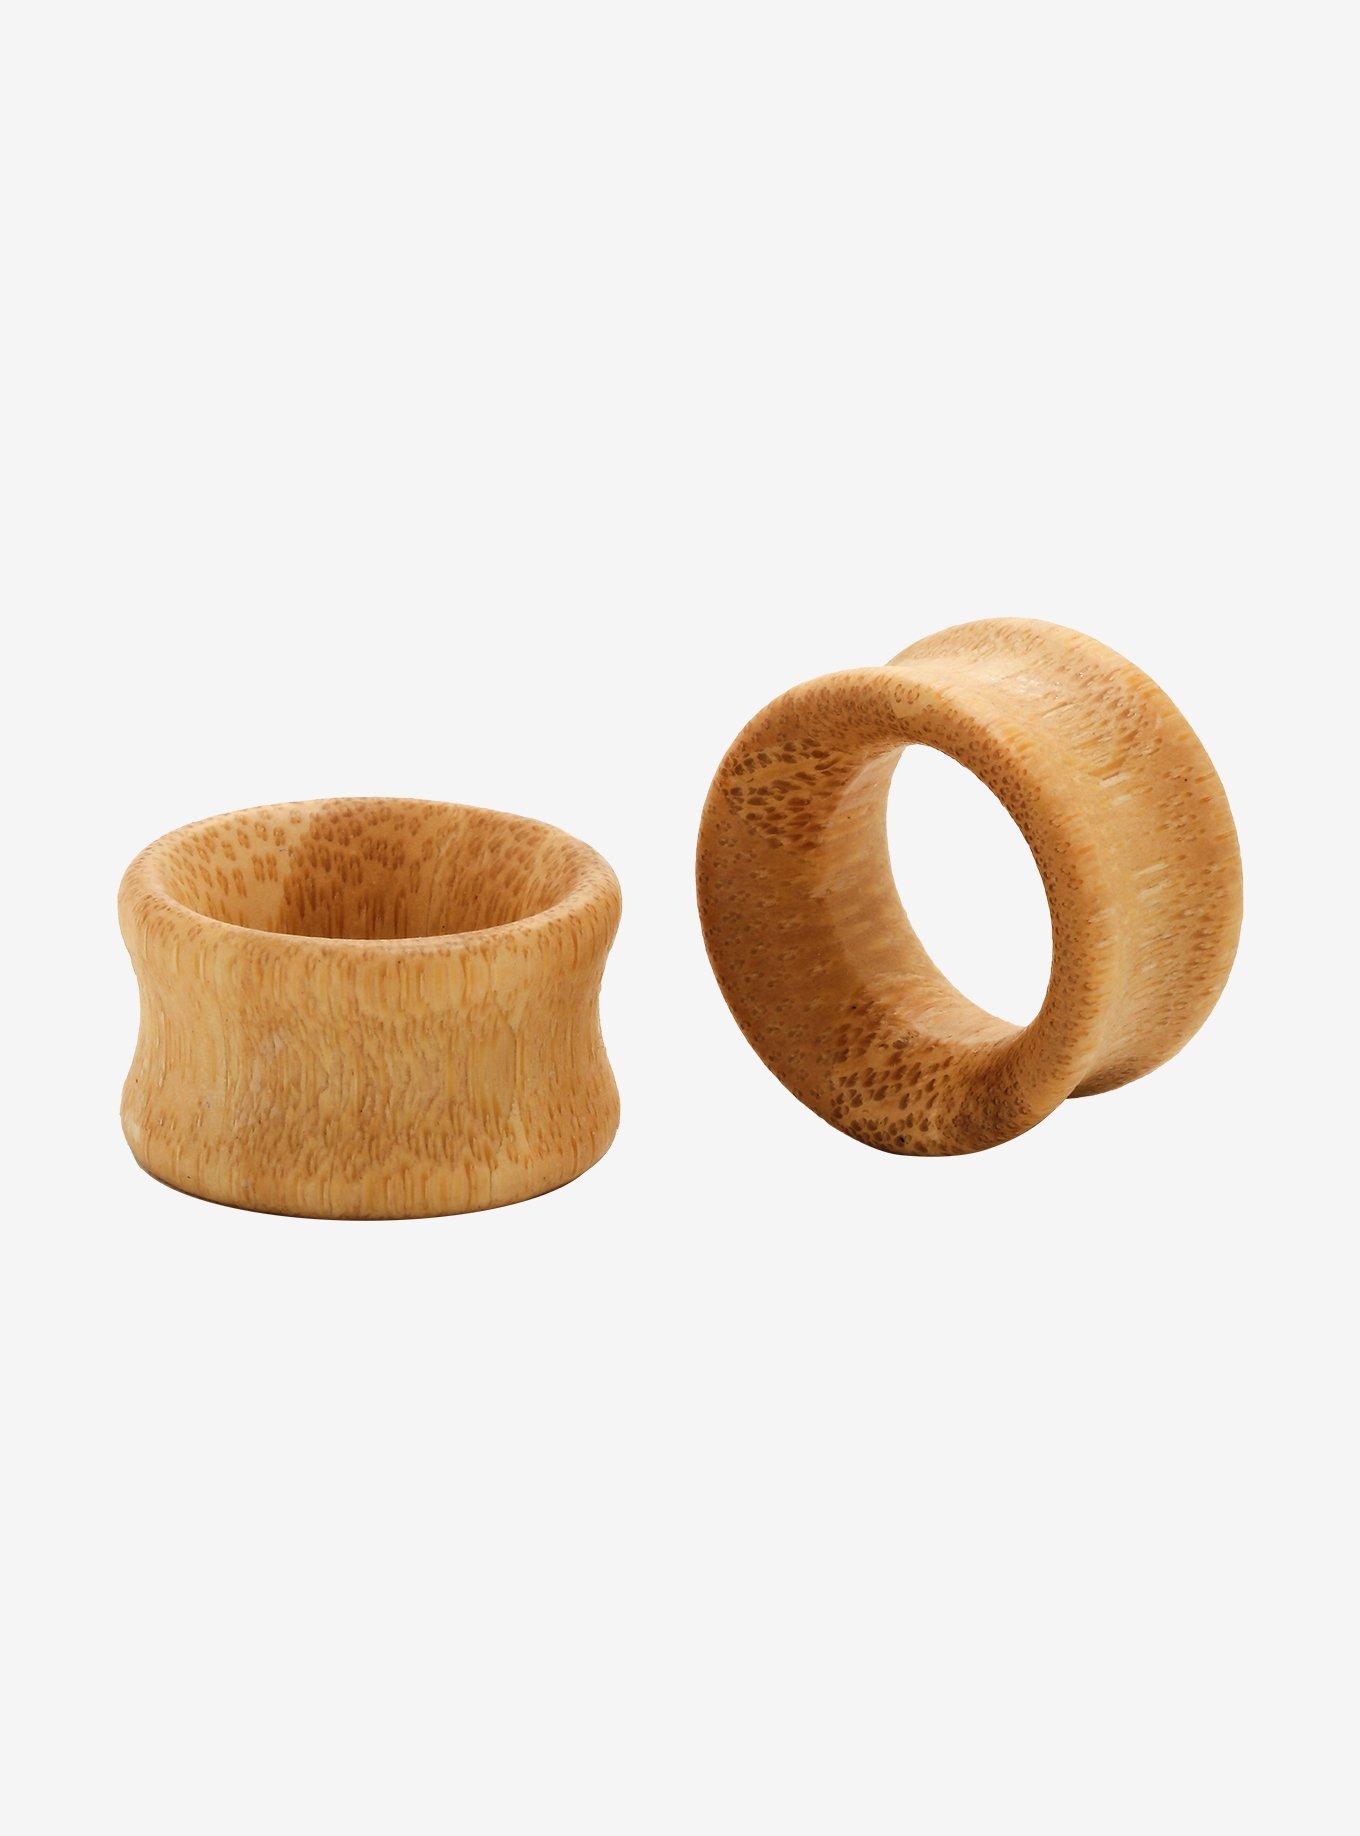 Bamboo Tunnel Plug 2 Pack, BROWN  SAND, hi-res